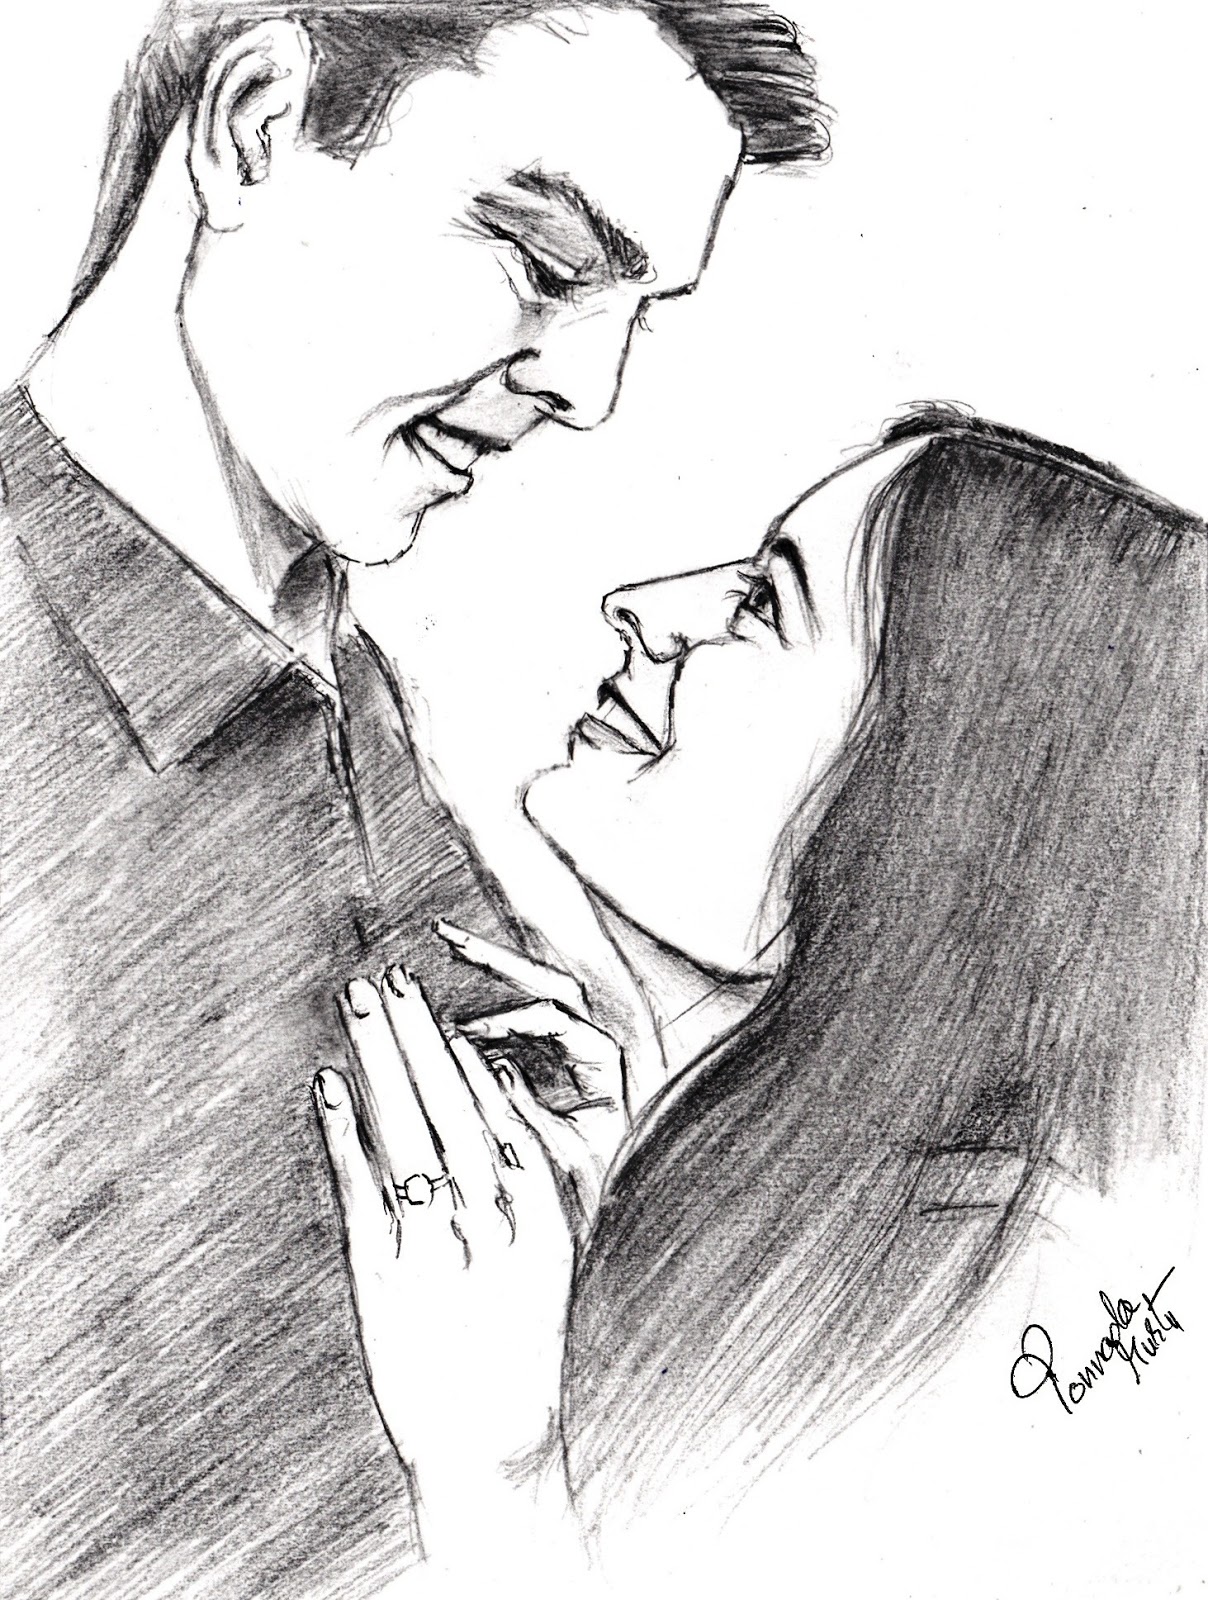 Sketches and Drawings : The lovers - Pencil sketch